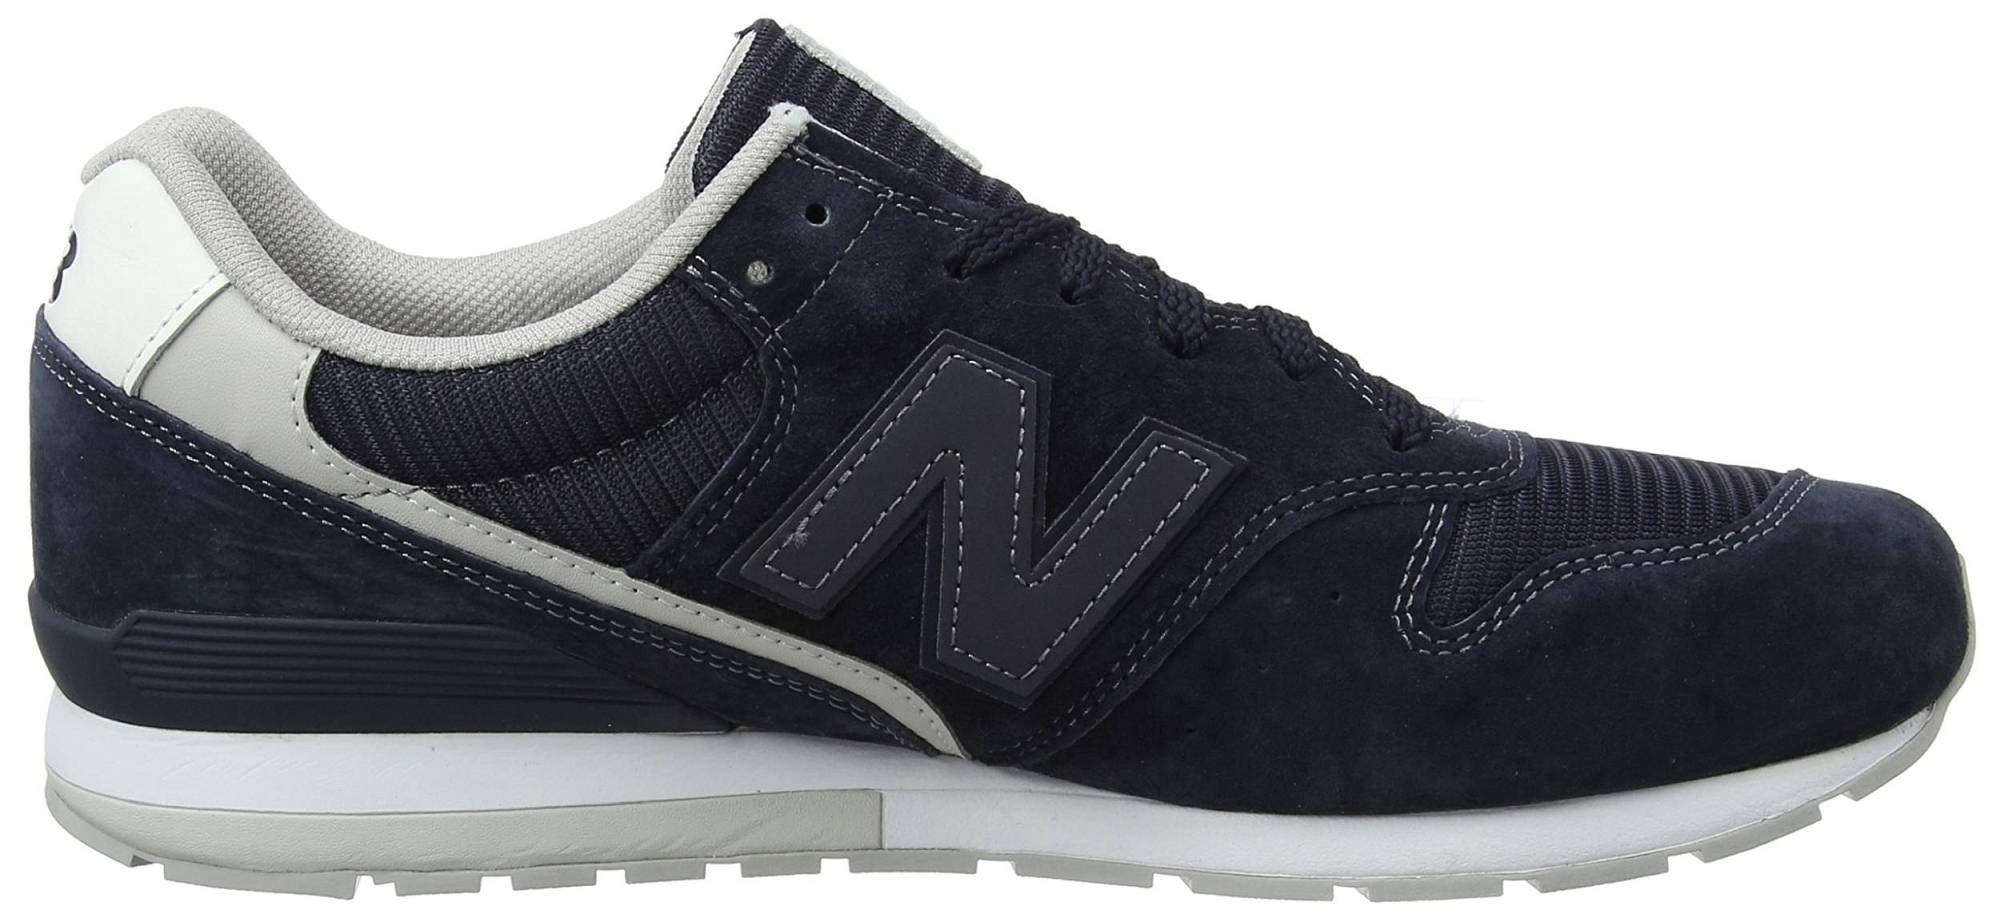 New Balance 996 Suede – Shoes Reviews & Reasons To Buy